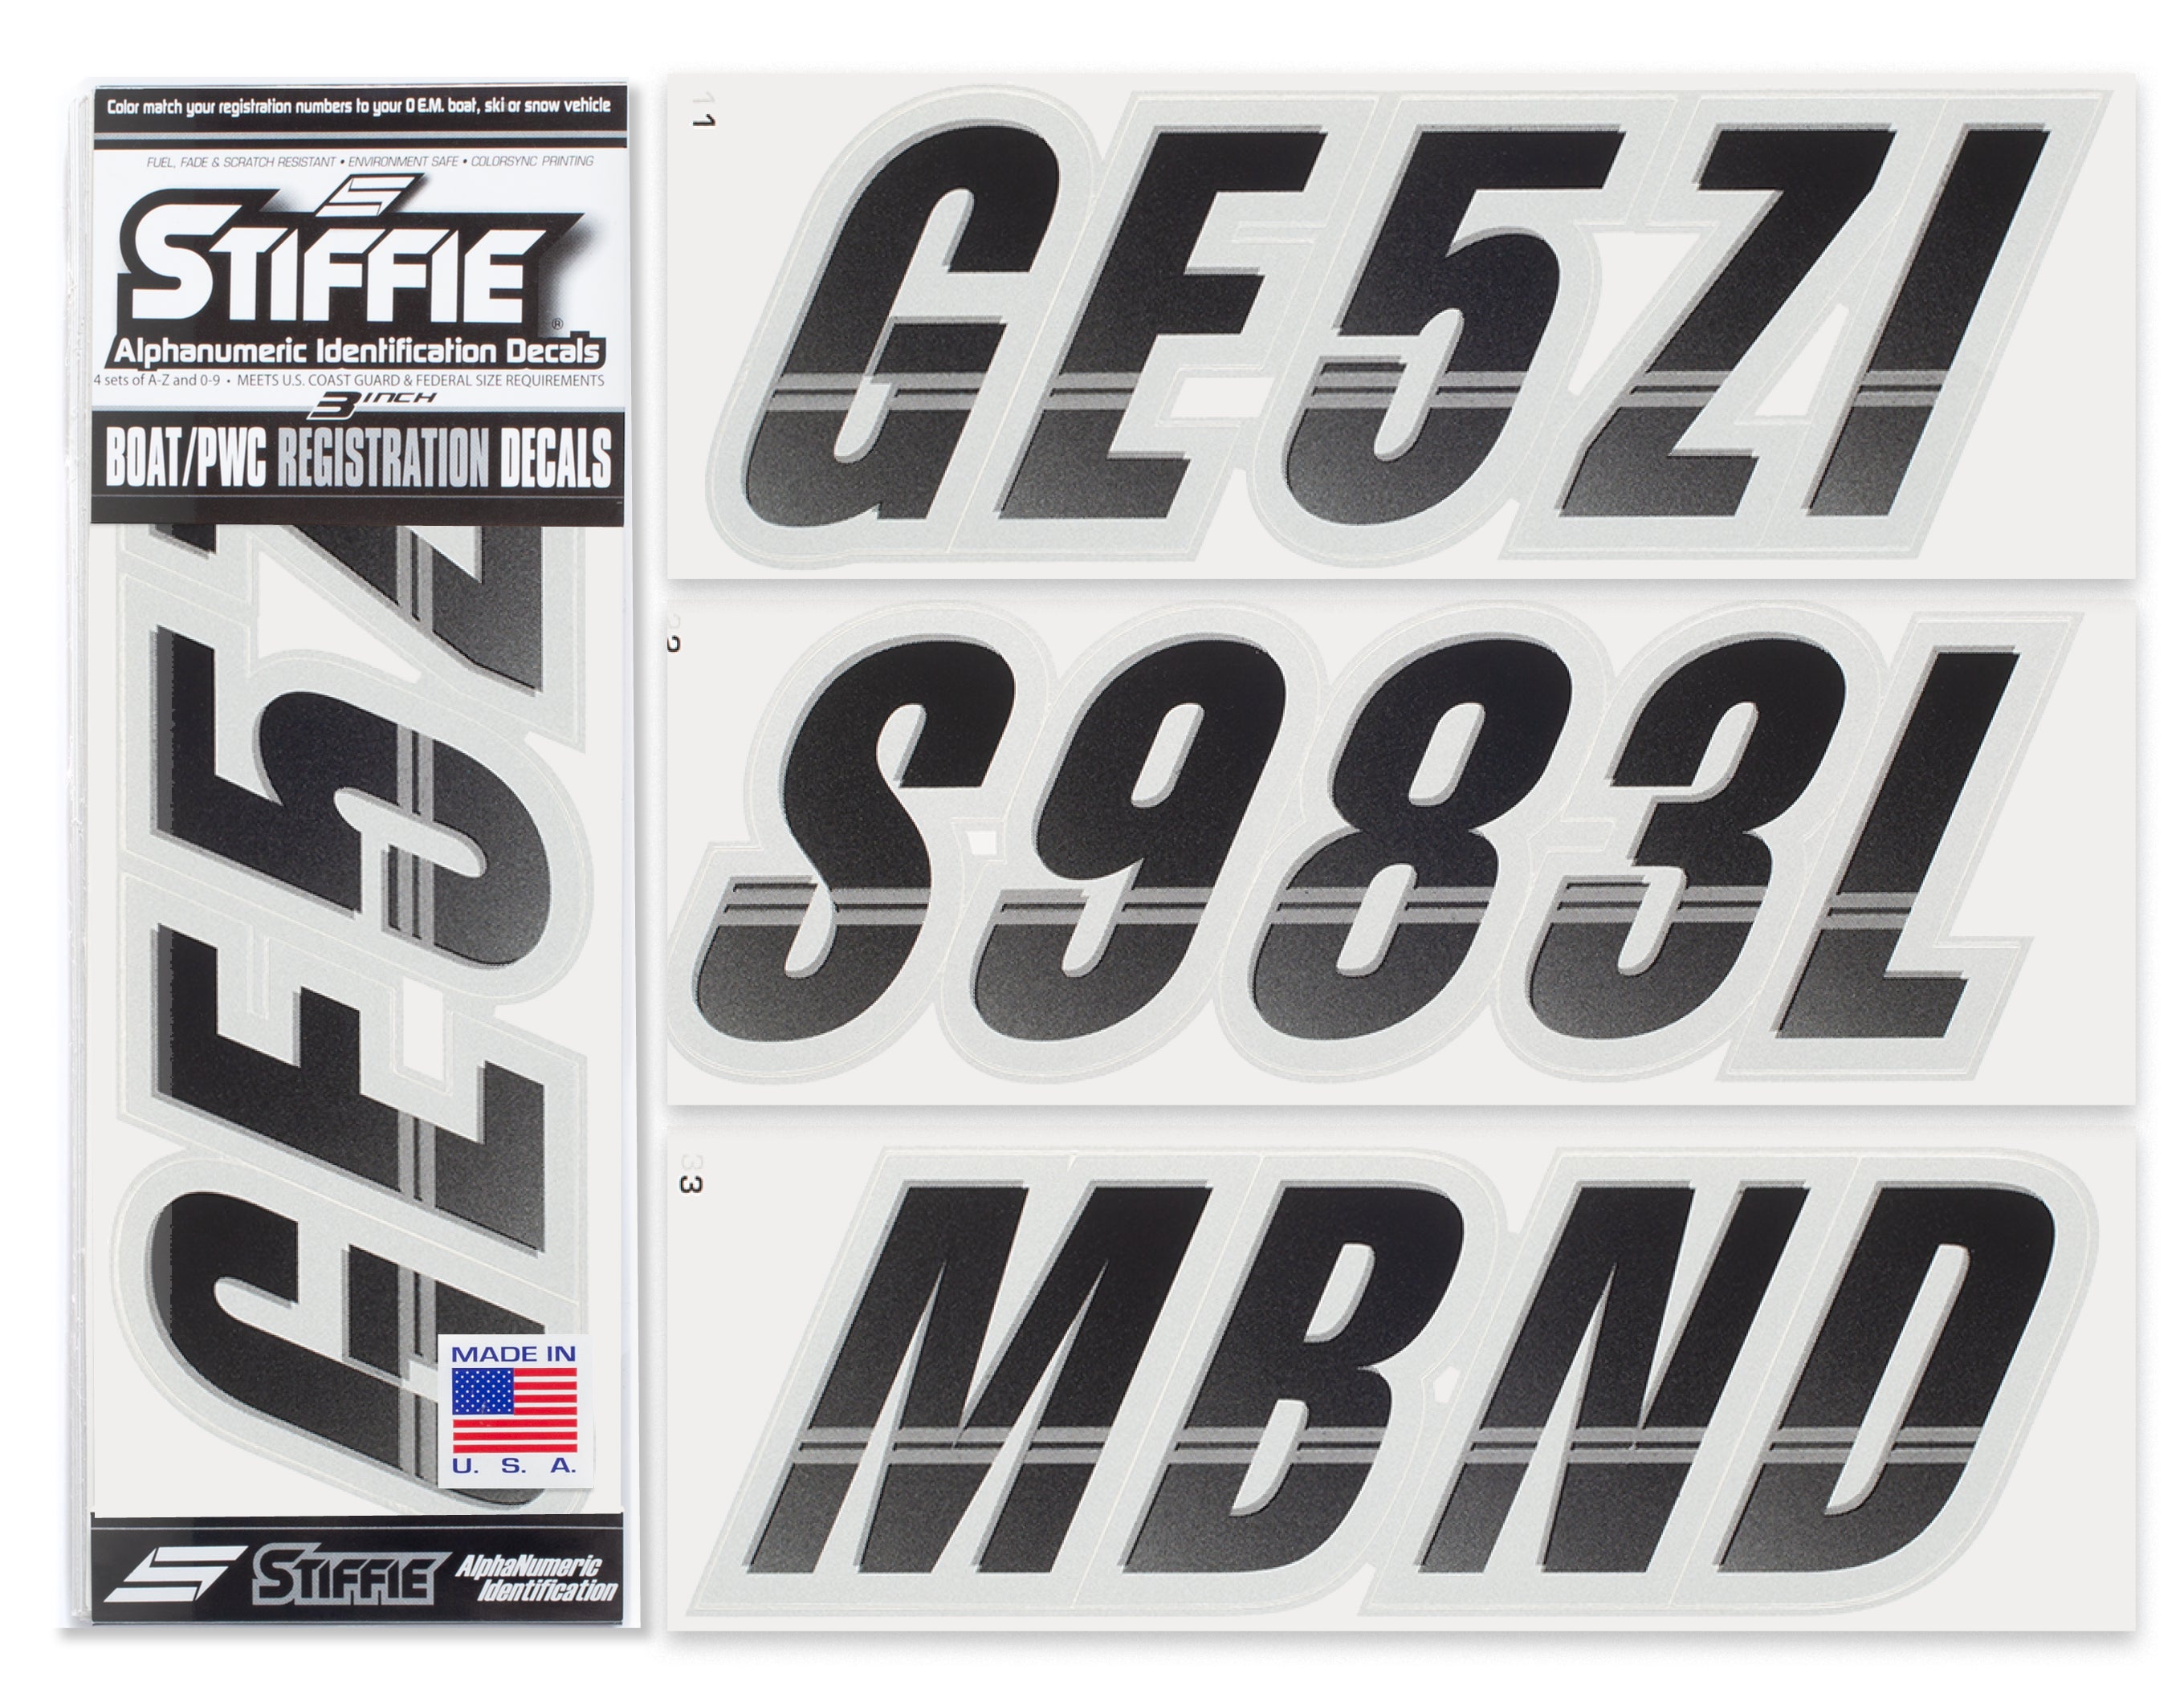 STIFFIE Techtron Black/Silver 3" Alpha-Numeric Registration Identification Numbers Stickers Decals for Boats & Personal Watercraft